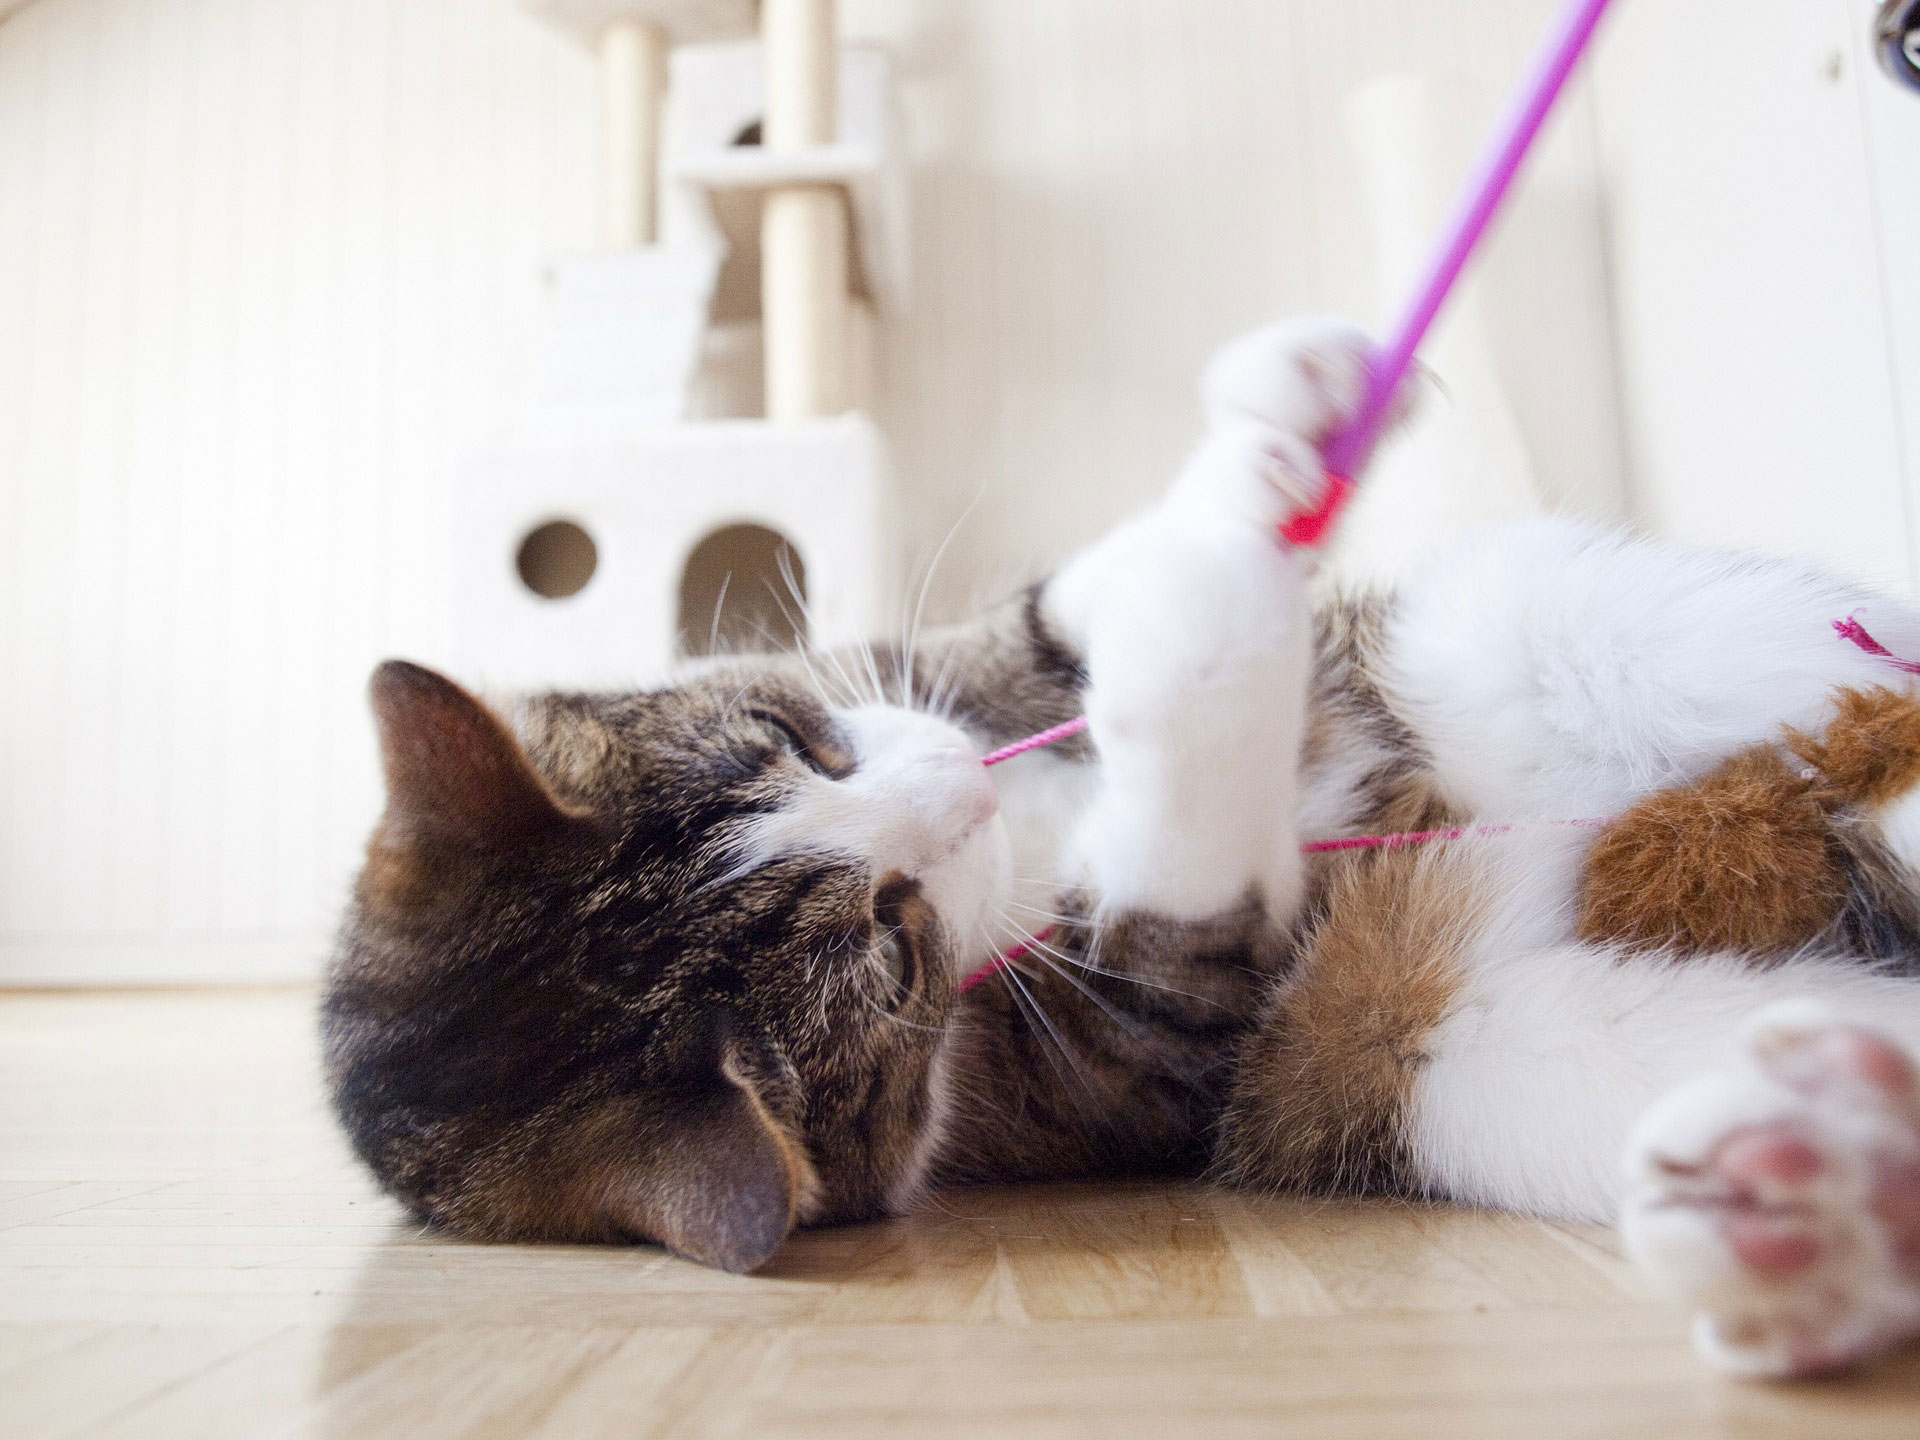 Young cat playing with yarn on the floor